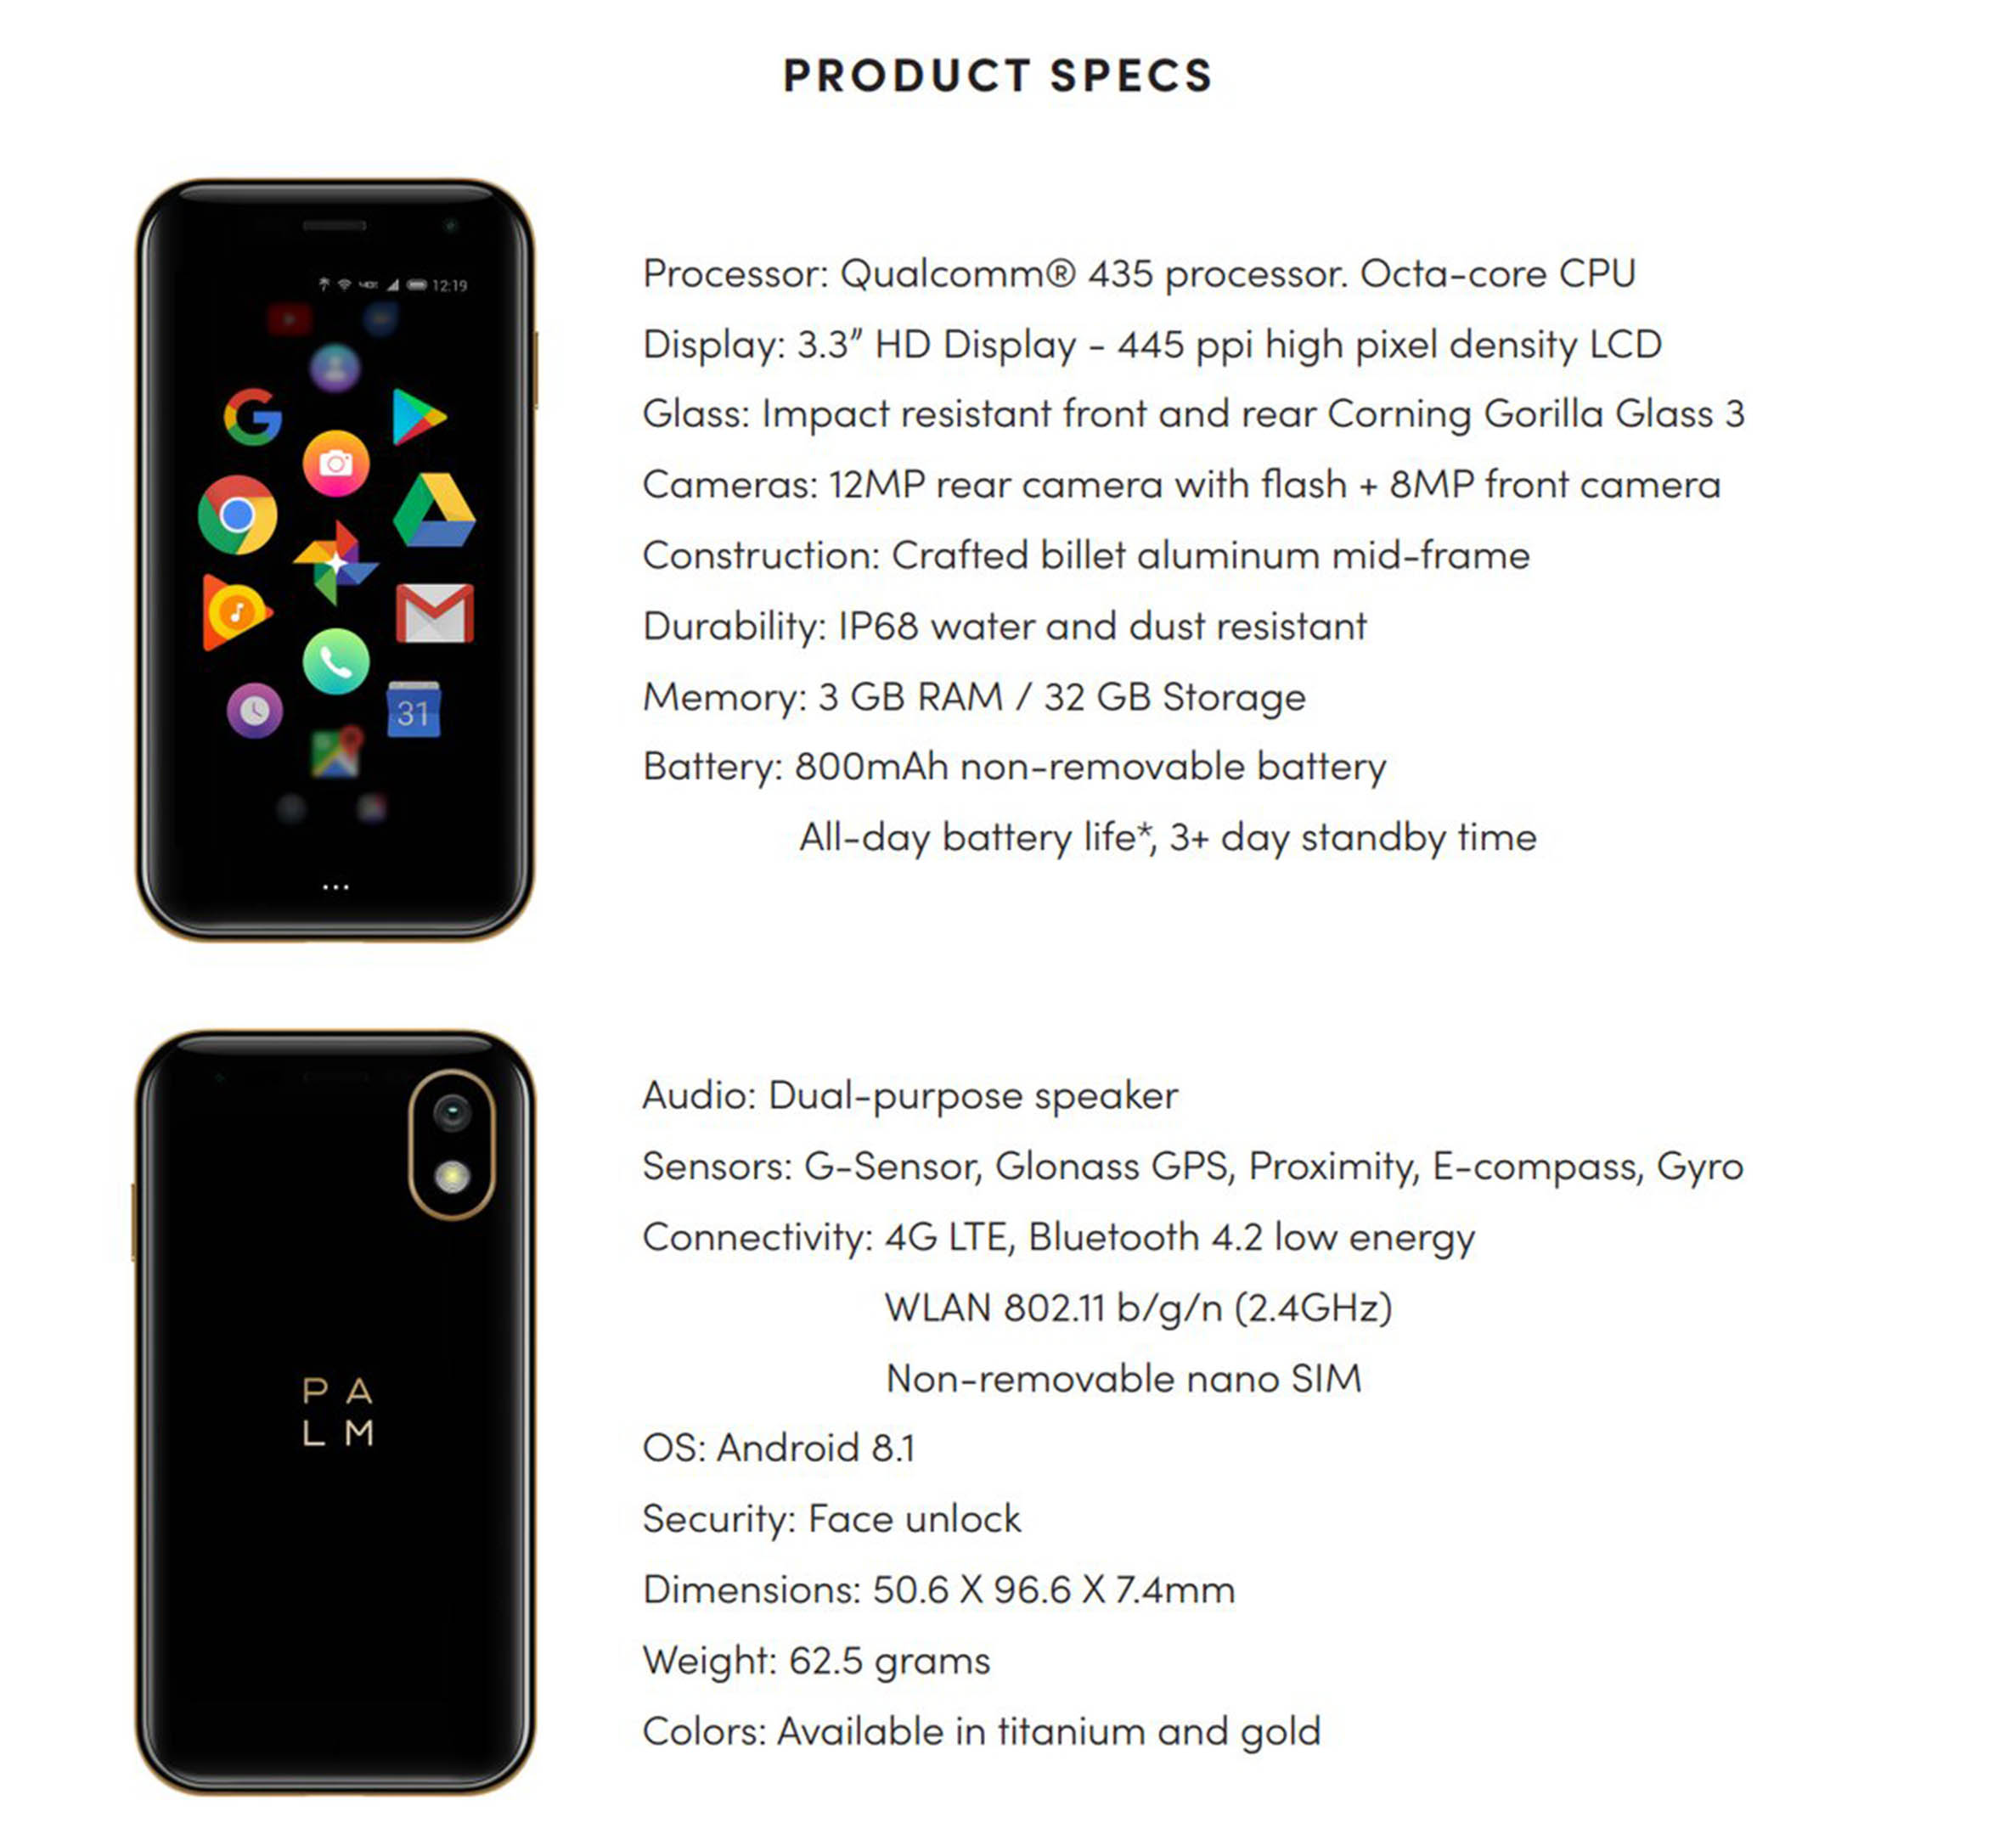 Palm product specs